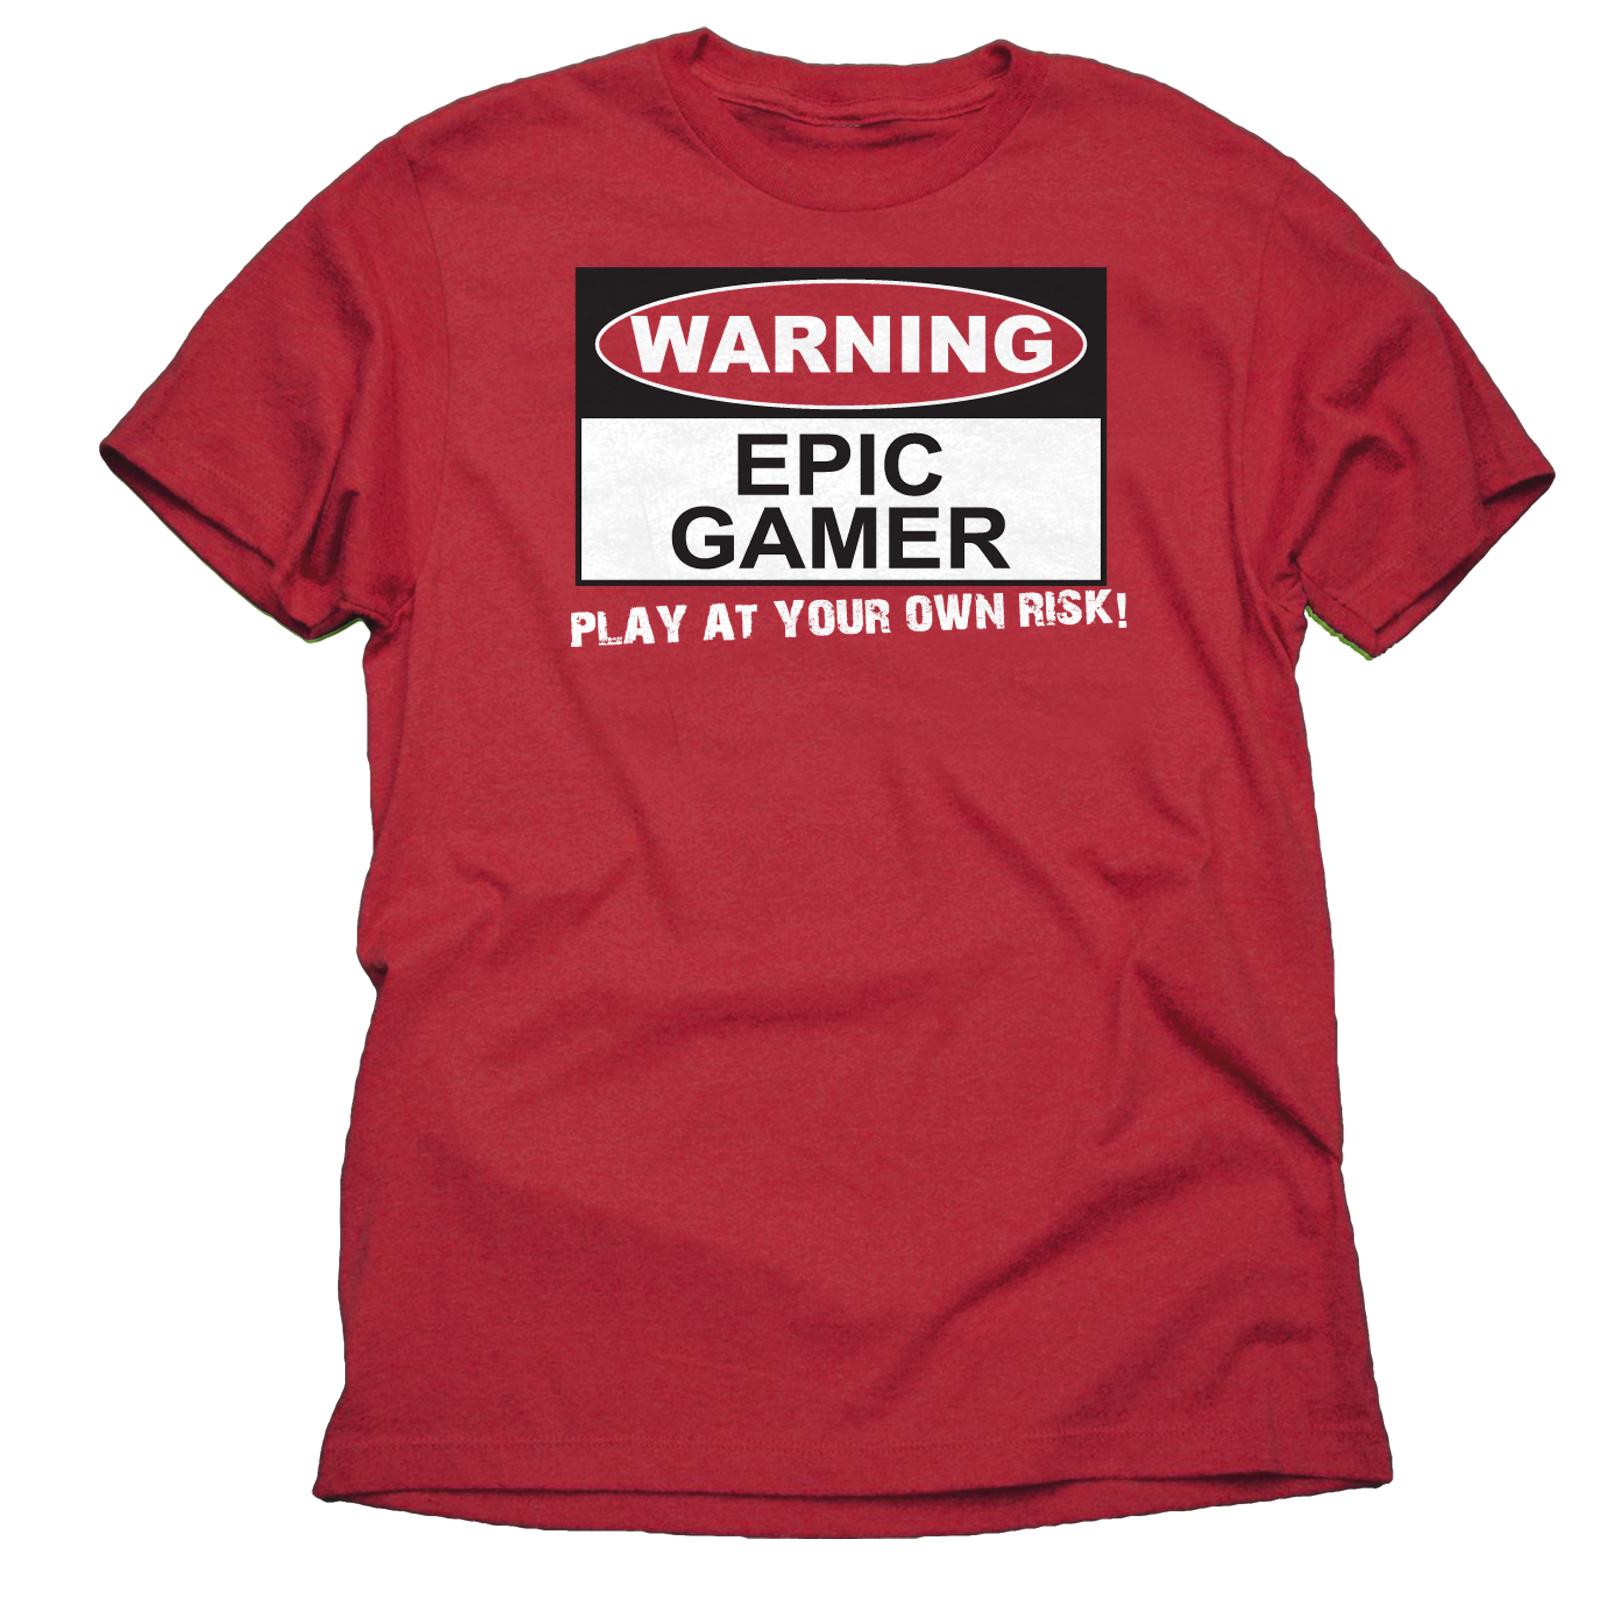 Route 66 Boy's Graphic T-Shirt - Epic Gamer